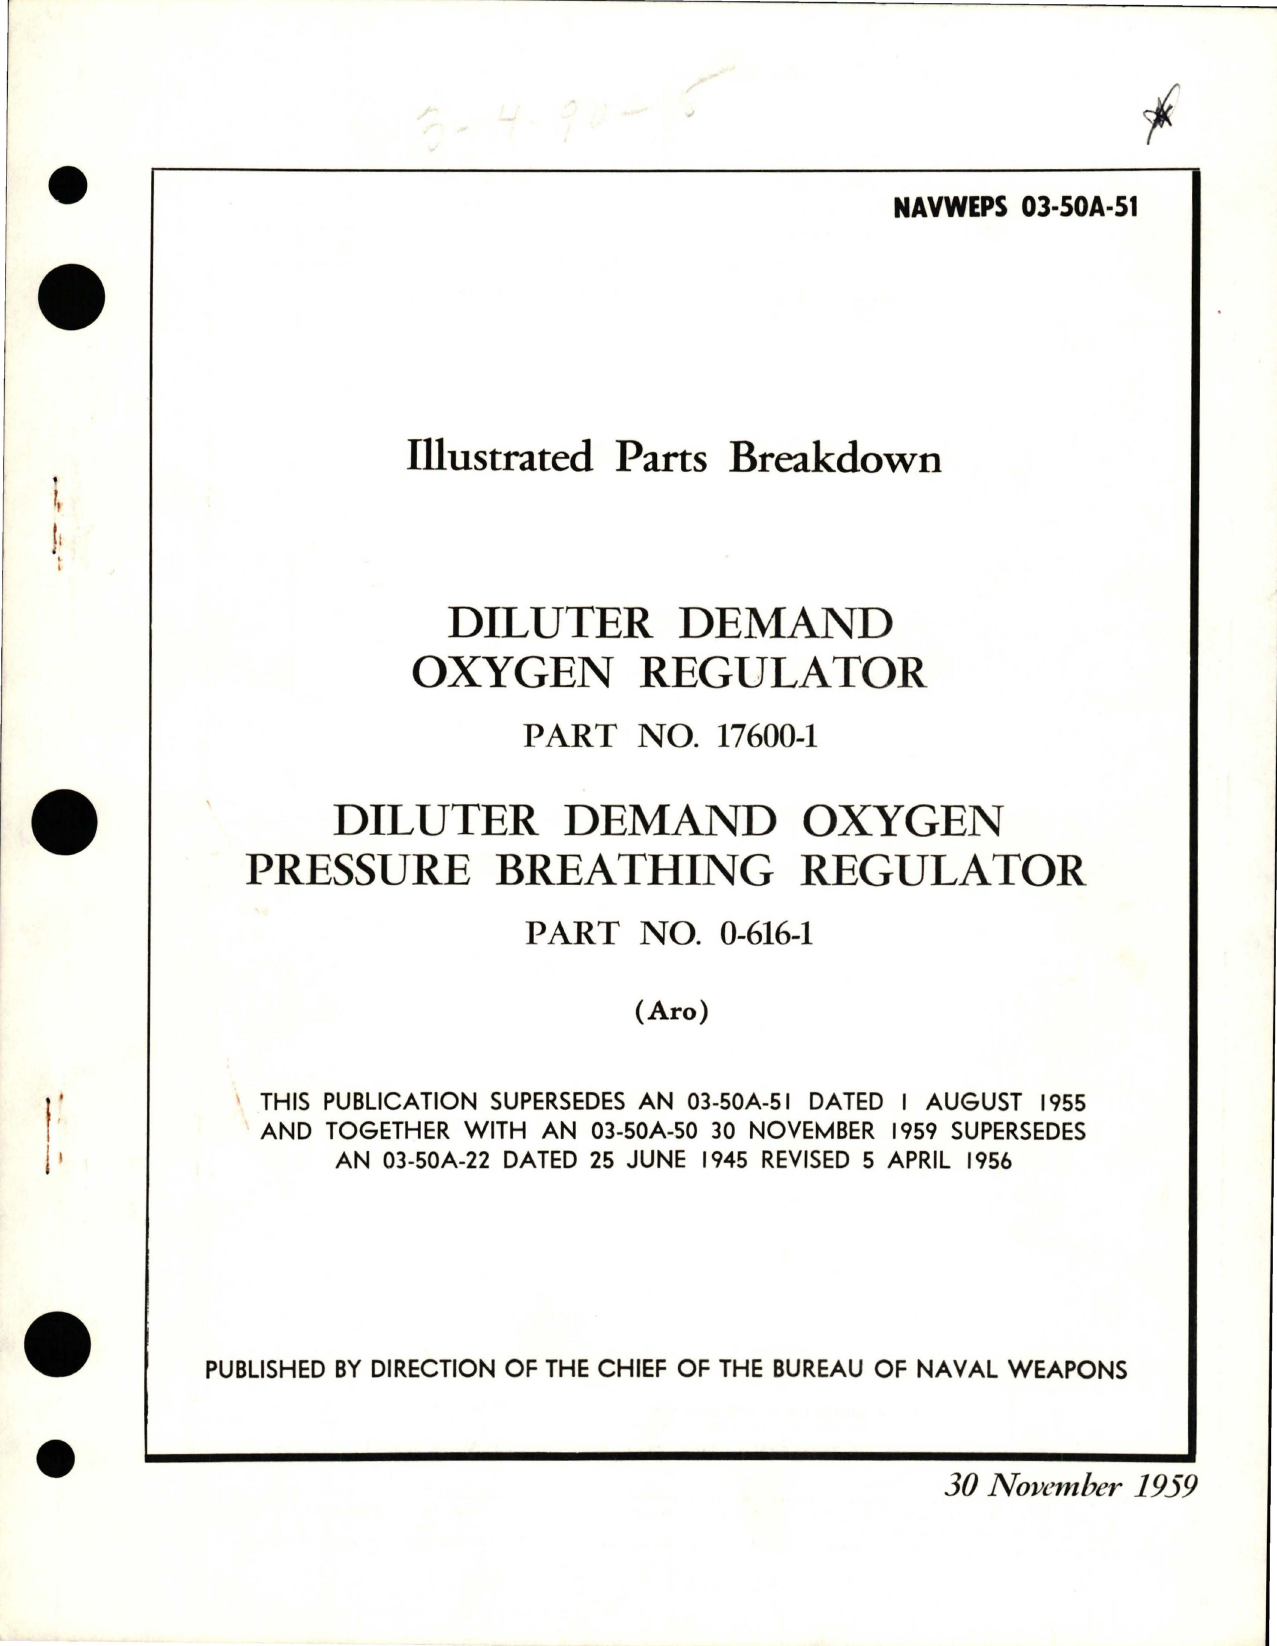 Sample page 1 from AirCorps Library document: Illustrated Parts Breakdown for Diluter Demand Oxygen & Pressure Breathing Regulator - Parts 17600-1 and 0-616-1